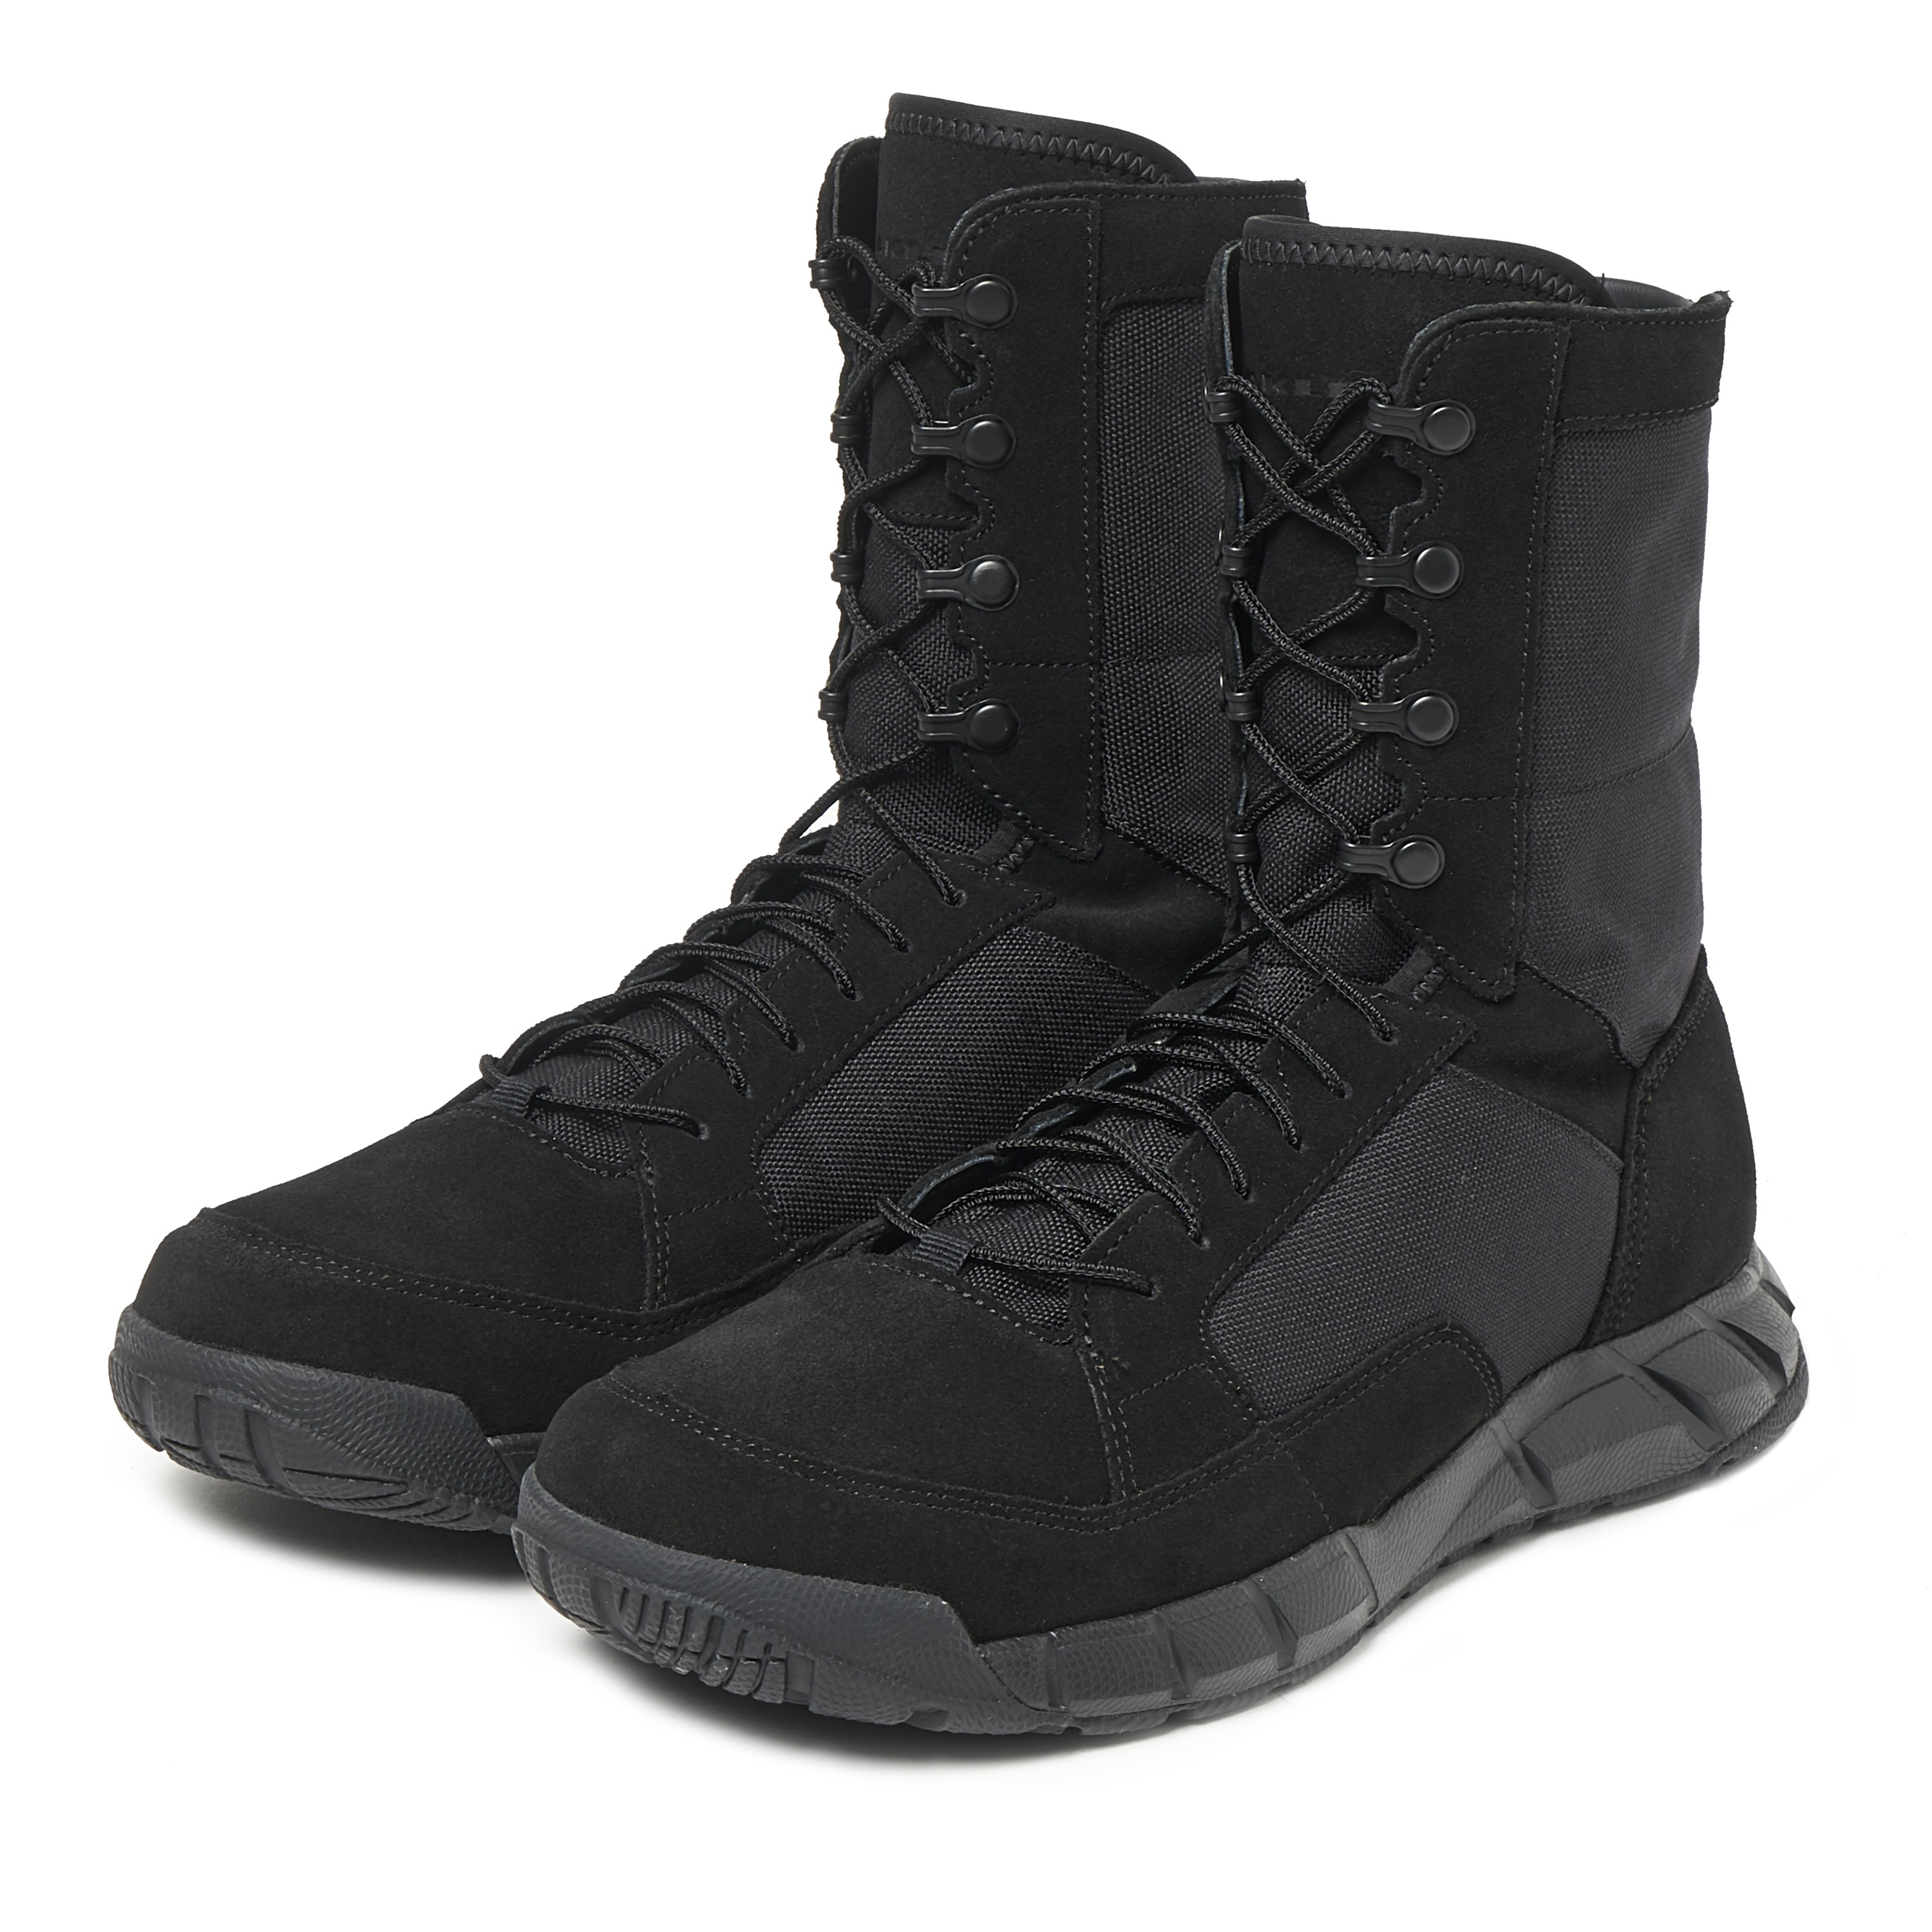 Oakley SI Light Assault Boots 2 - Men's | 5 Star Rating w/ Free Shipping  and Handling